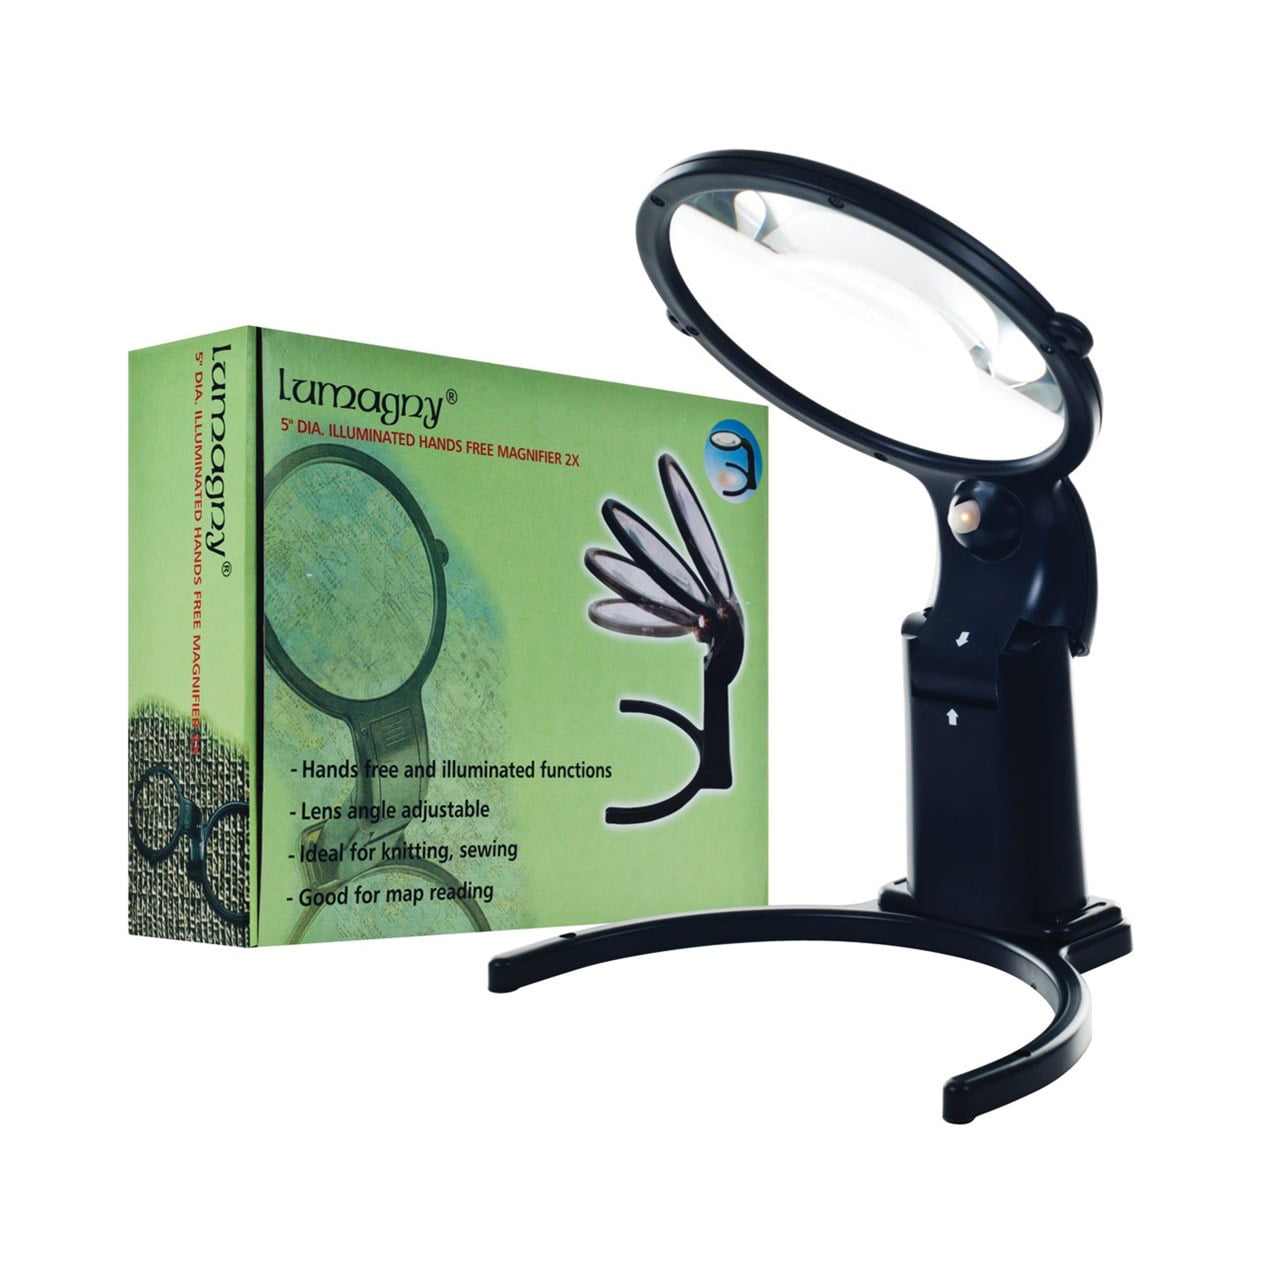 MaxiAids Illuminated 5-in Diameter Hands Free 2x Magnifier